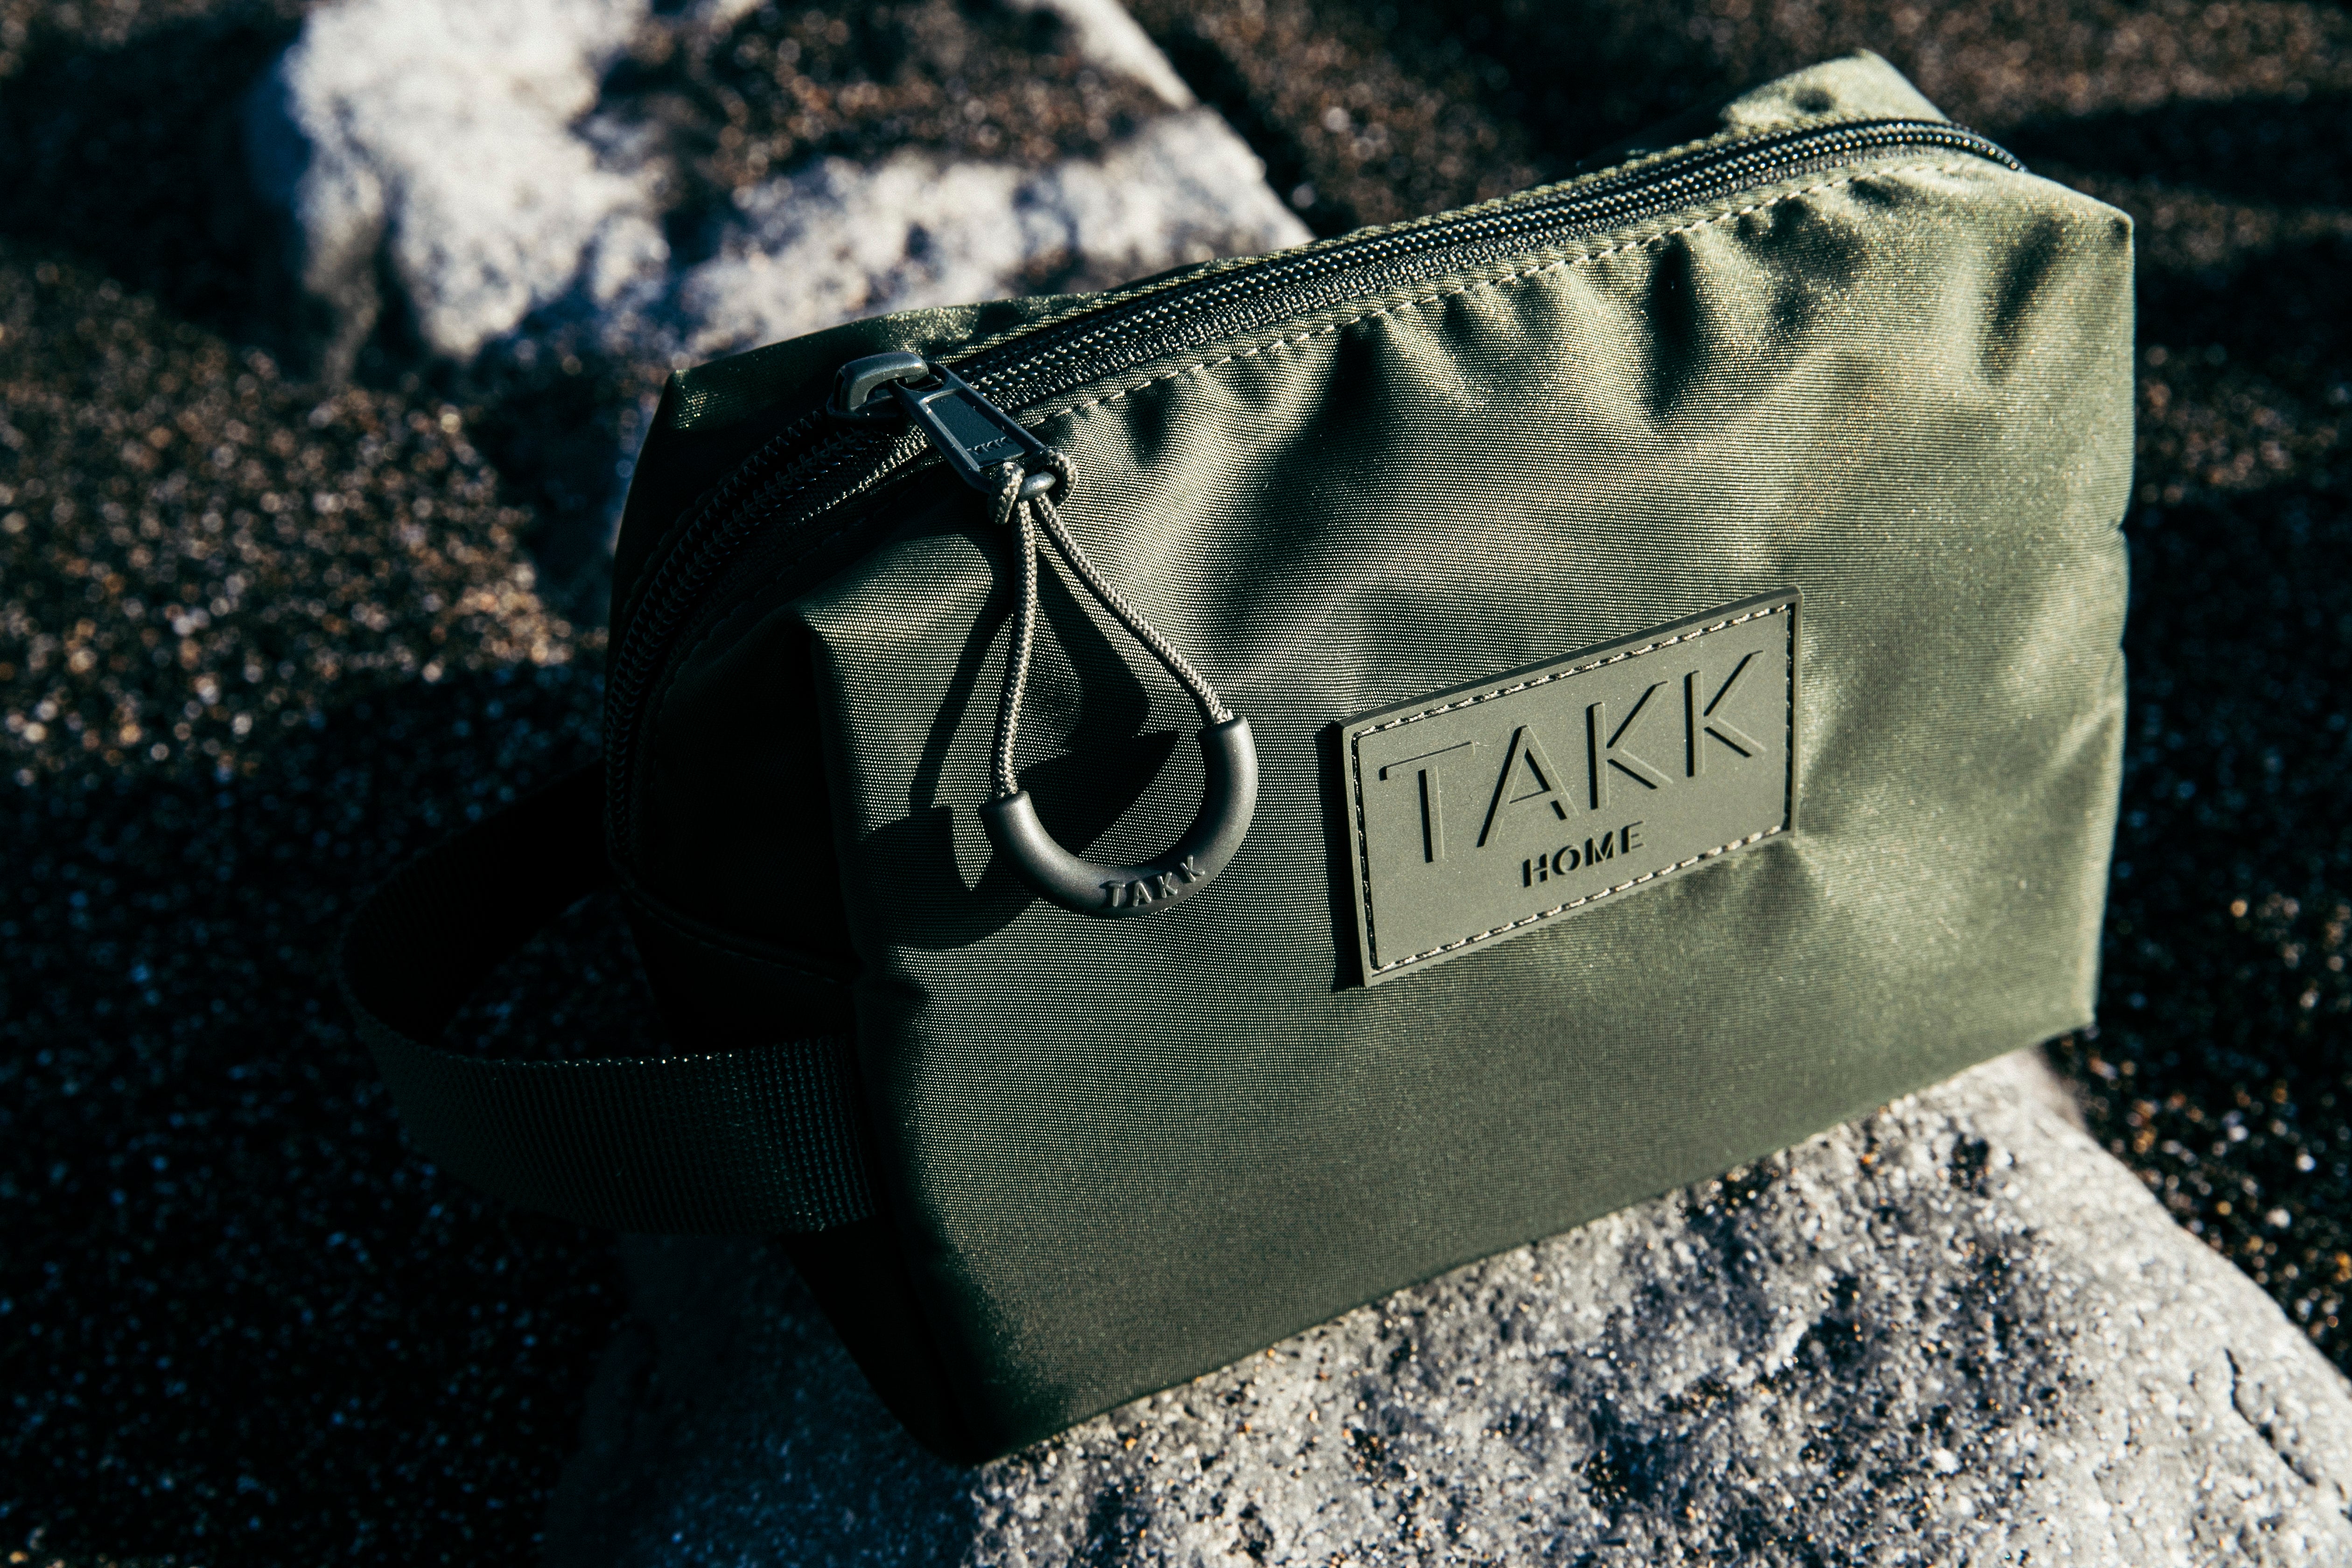 Modern, lightweight and eco-friendly make up bag. Ideal to store your everyday make up and beauty essentials. It is a perfect size for slipping into your everyday tote or bag. Recycled polyester. YKK zippers. Green